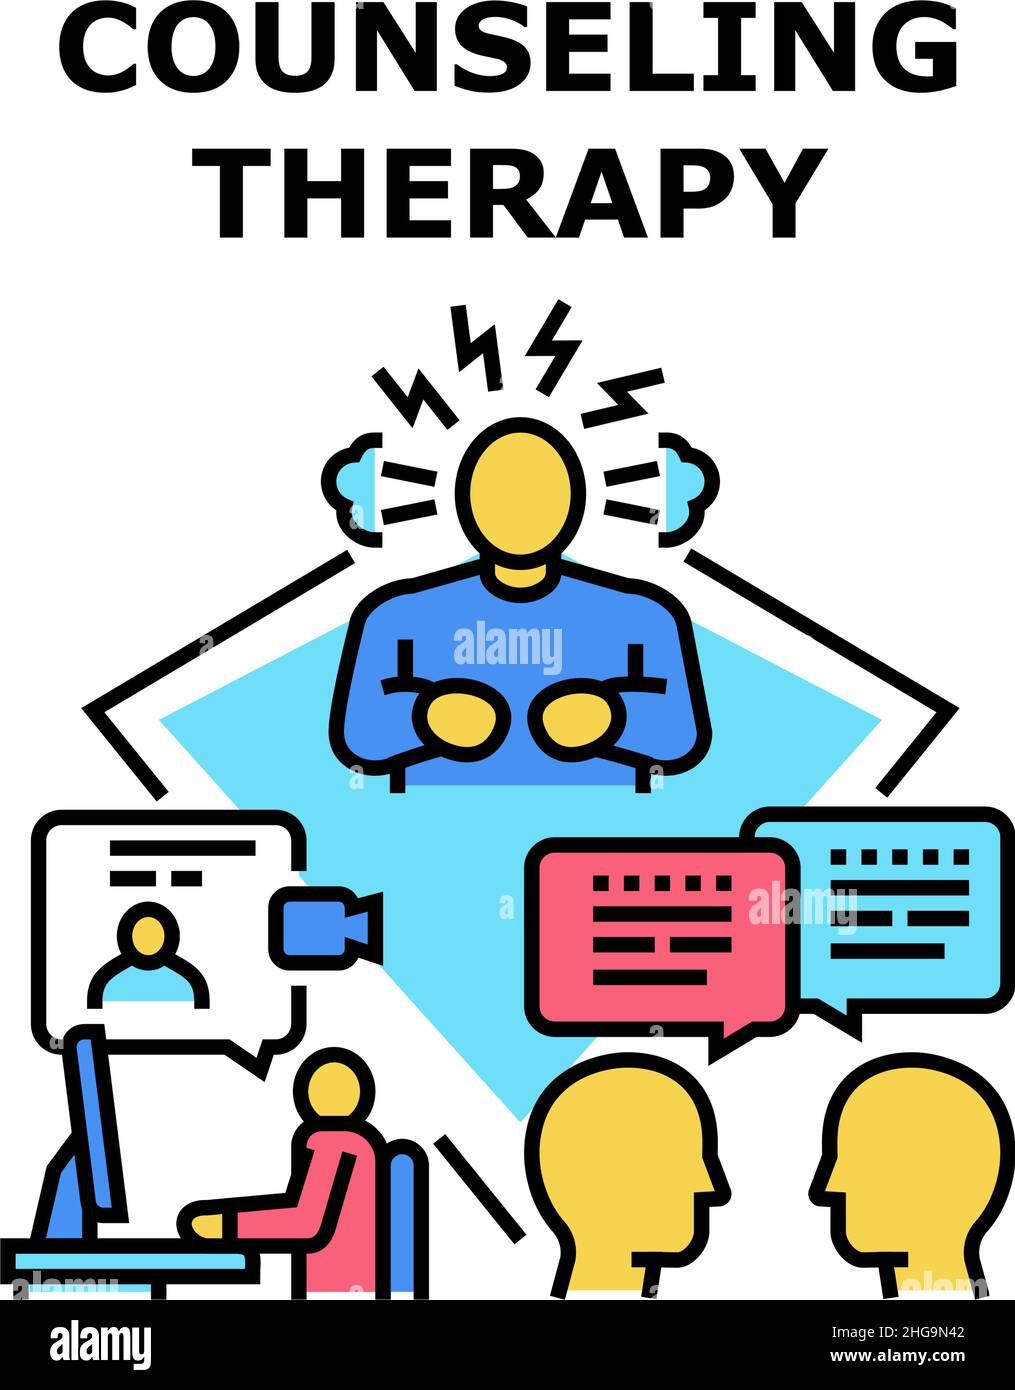 Counseling therapy icon vector illustration Stock Vector